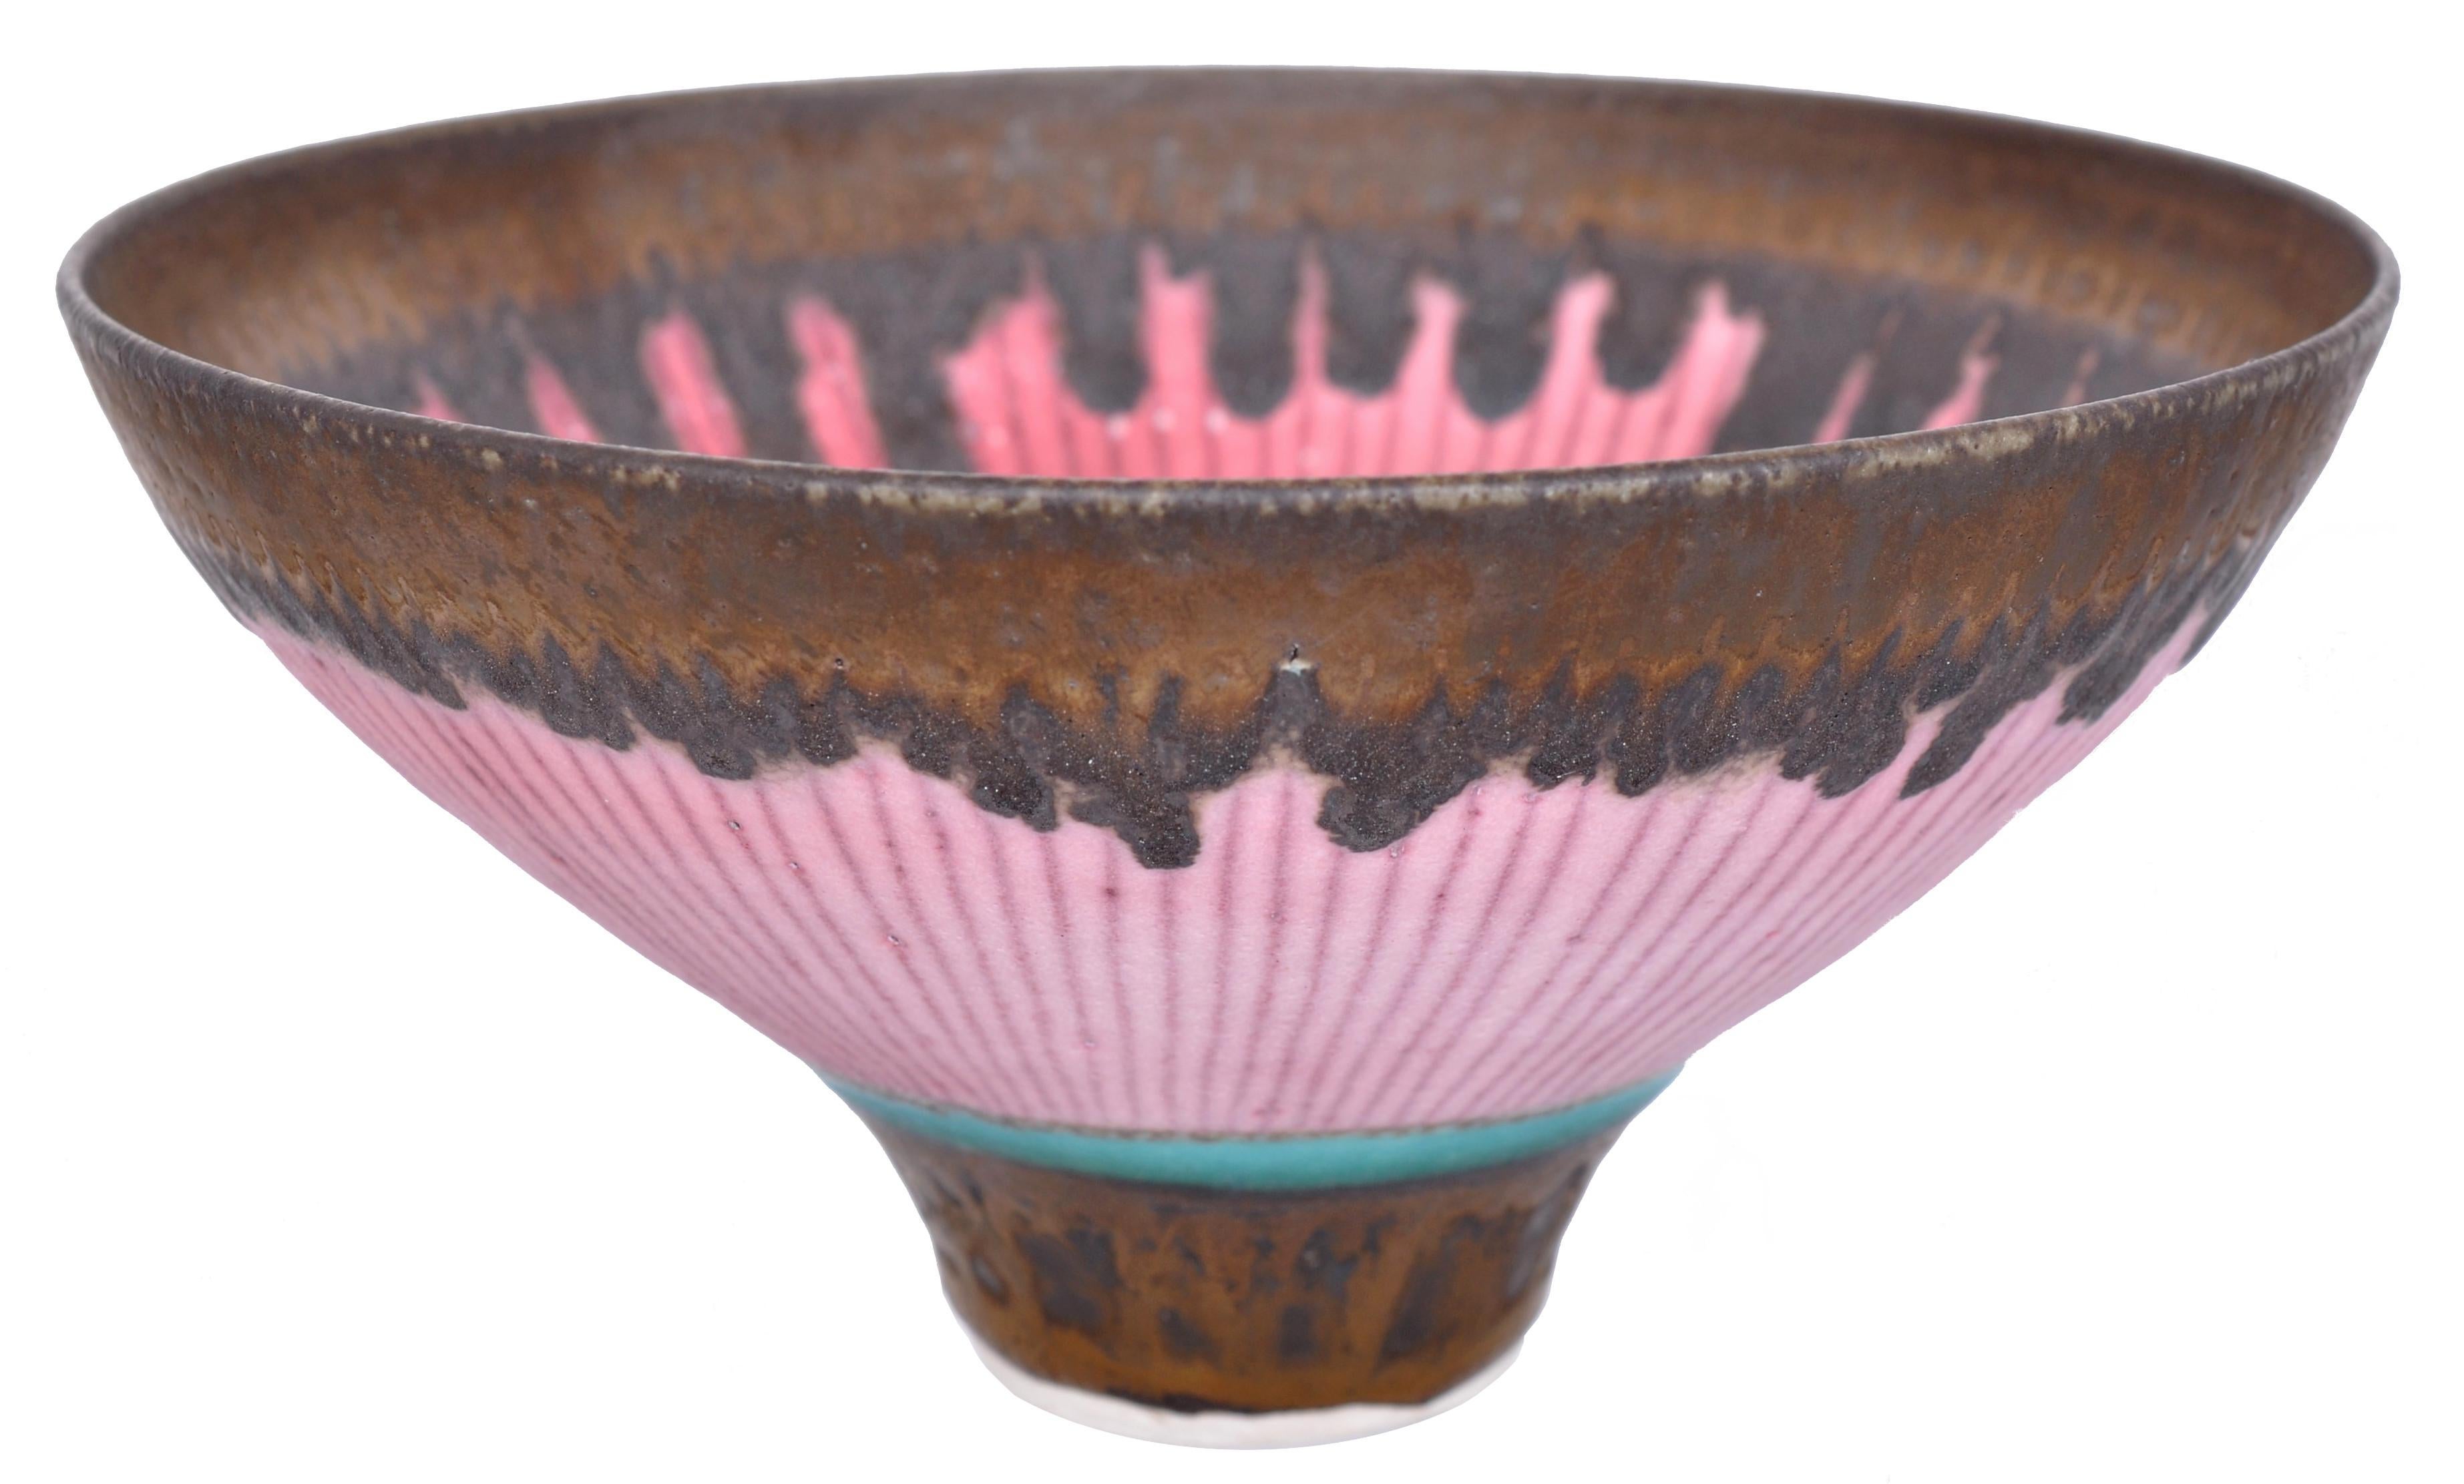 Important Dame Lucie Rie footed porcelain bowl, circa 1978. This rare and impressive Dame Lucie Rie porcelain bowl was purchased from the Westminster Gallery of Newbury Street, Boston, MA in 1981. The bowl was subsequently exhibited at the